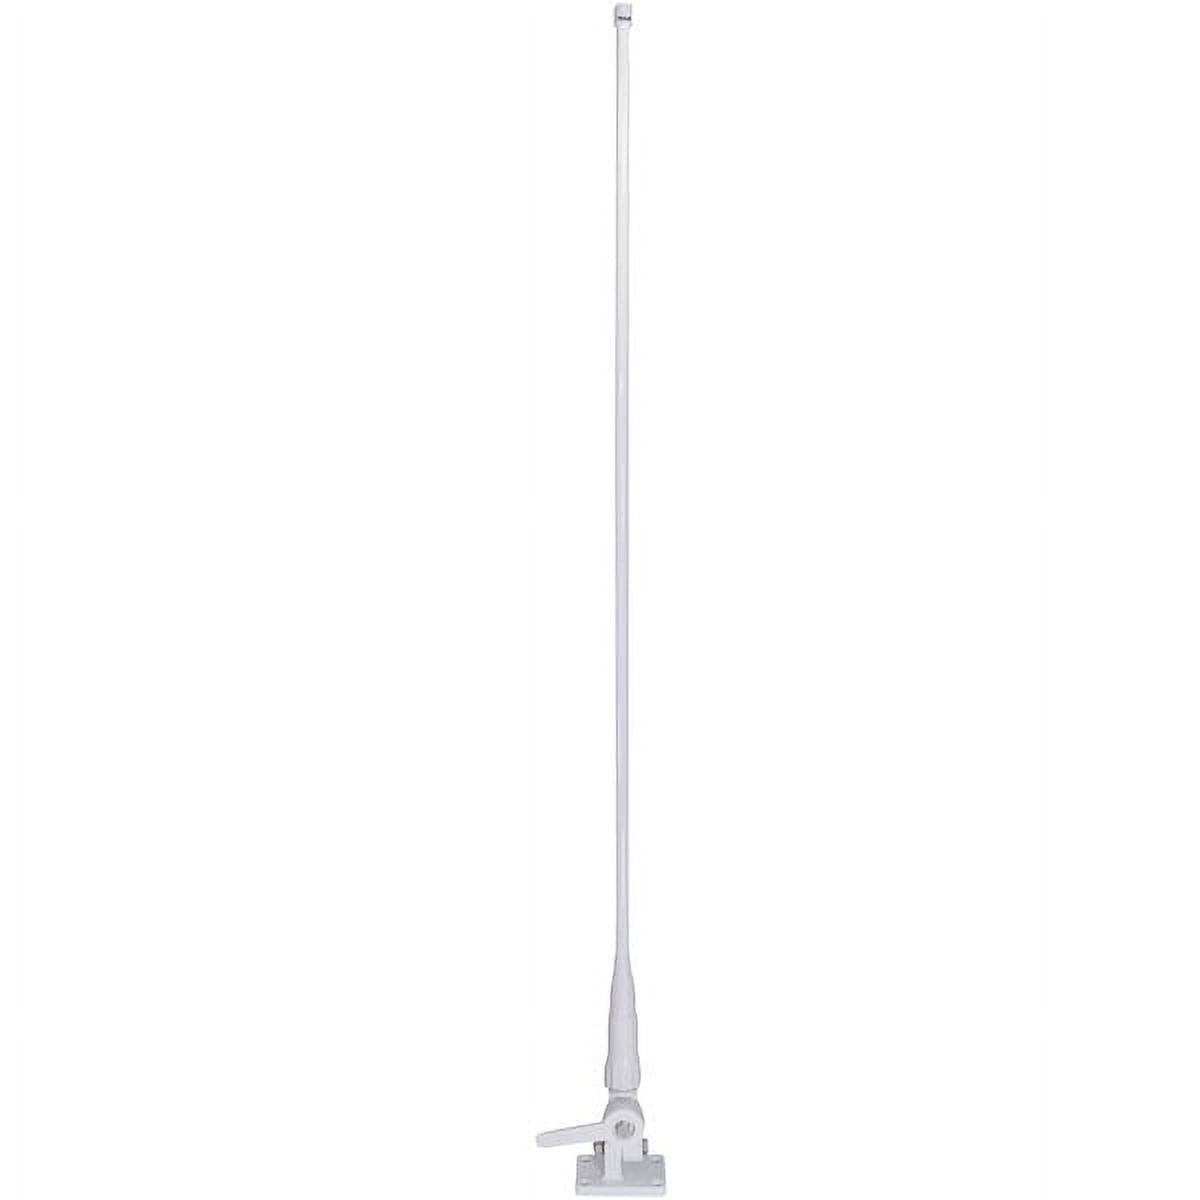 Tram® Tram® 46 Vhf 3dbd Gain Marine Antenna With Cable Built Into Ratchet Mount - image 1 of 1